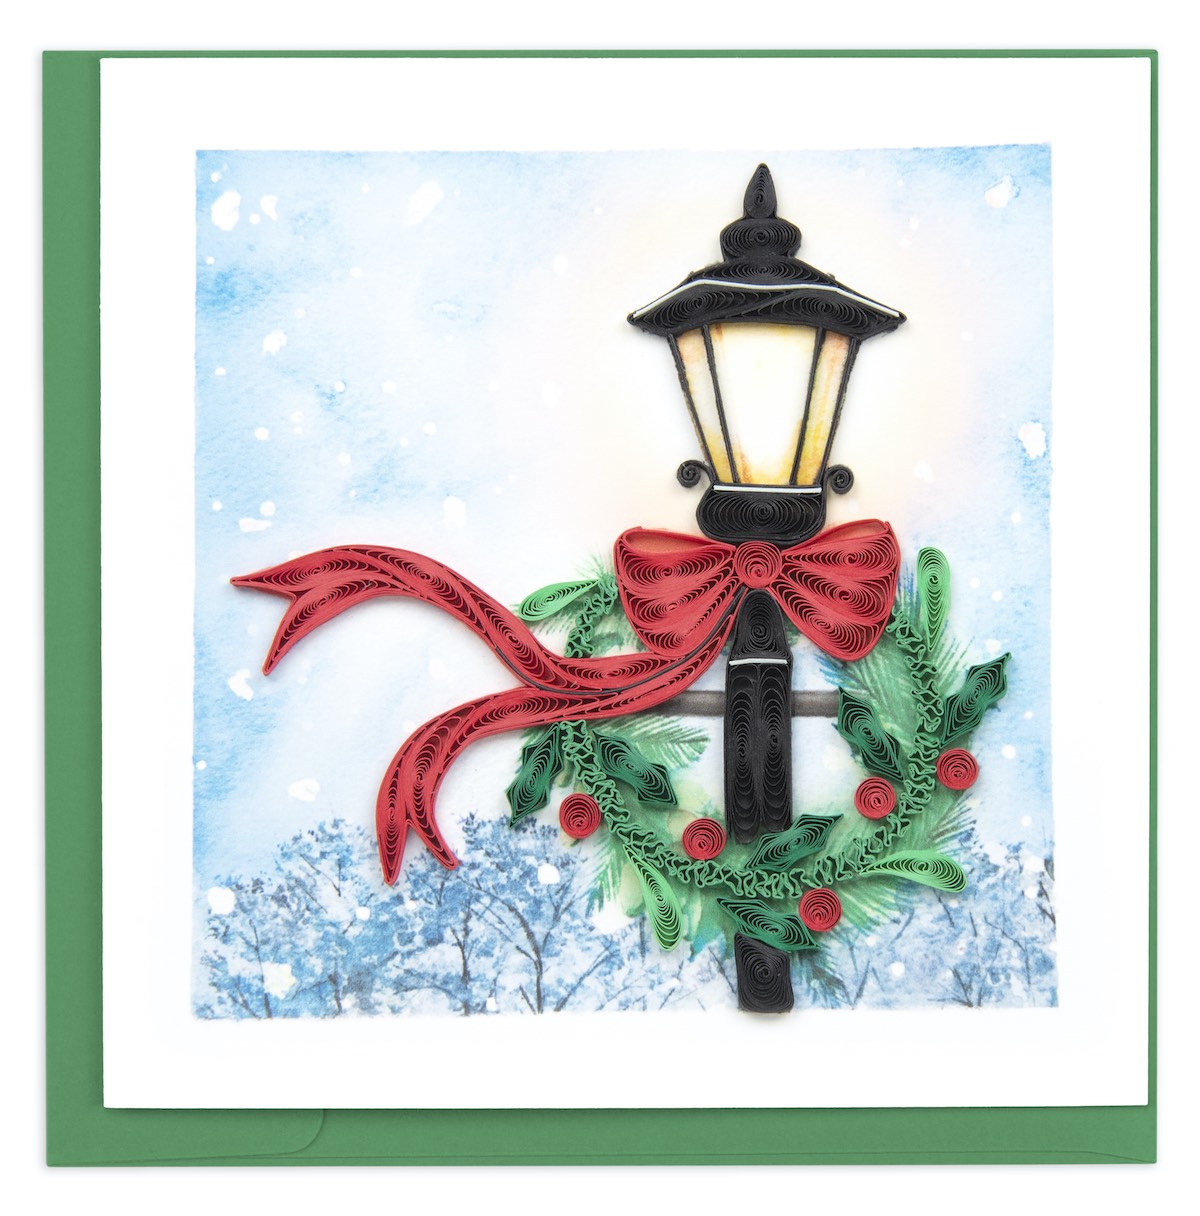 Quilled paper holiday lamp post with wreath and red bow from Quilling Card